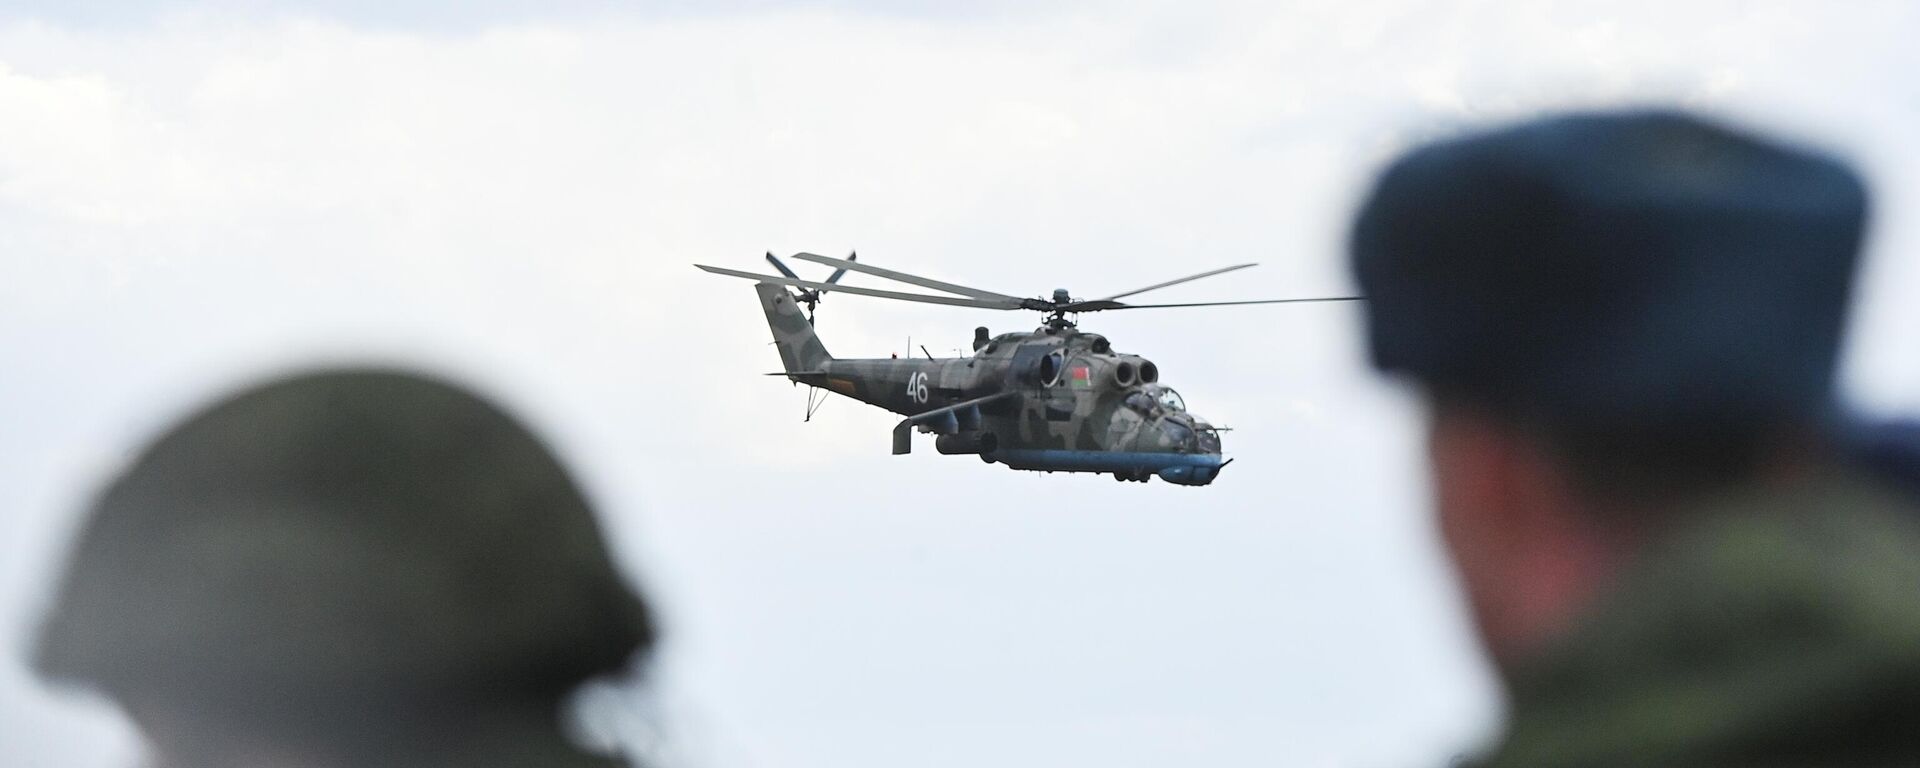 Mi-24 military helicopter takes part in the joint military drills between Belarus and Russia at the training ground in Belarus. - Sputnik International, 1920, 26.05.2023